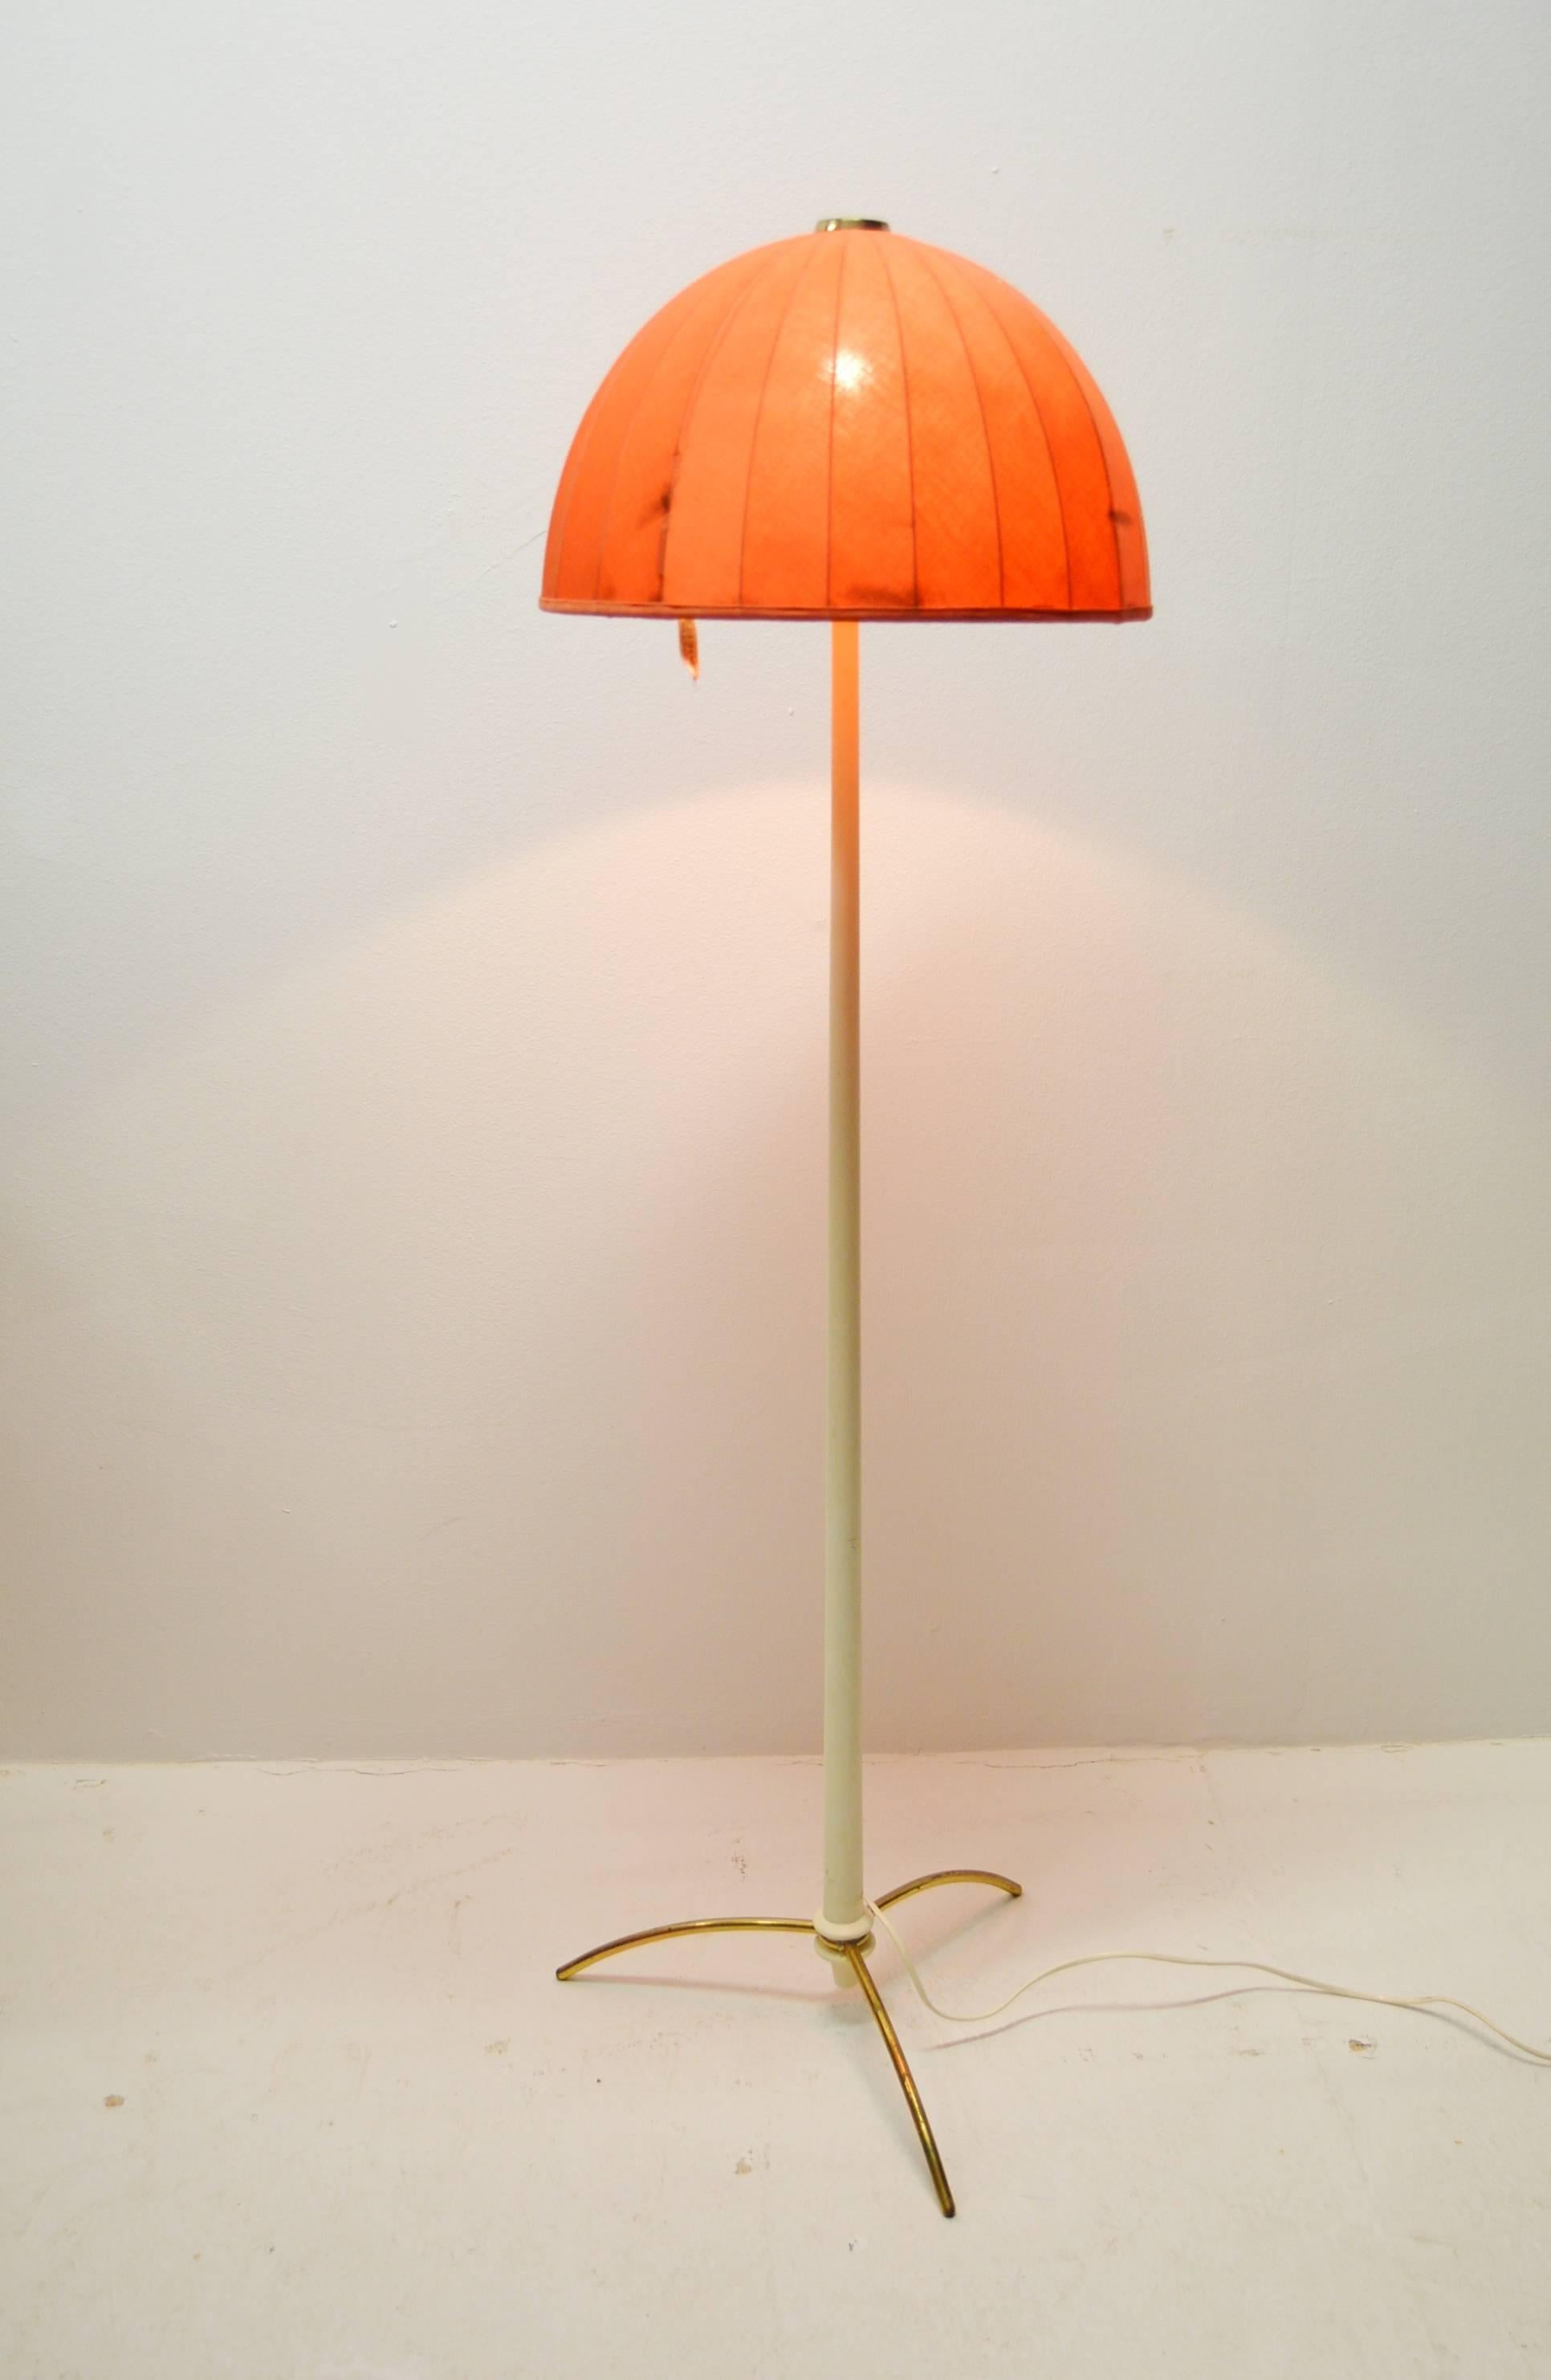 Three-legged floor lamp designed by Hans-Agne Jakobsson for his own company in Markaryd, Sweden.

Brass foot and white laquered wooden bar.
Original lampshade with wear and marks.

Height without lampshade is 114 cm

- circa year 1950
- E 27